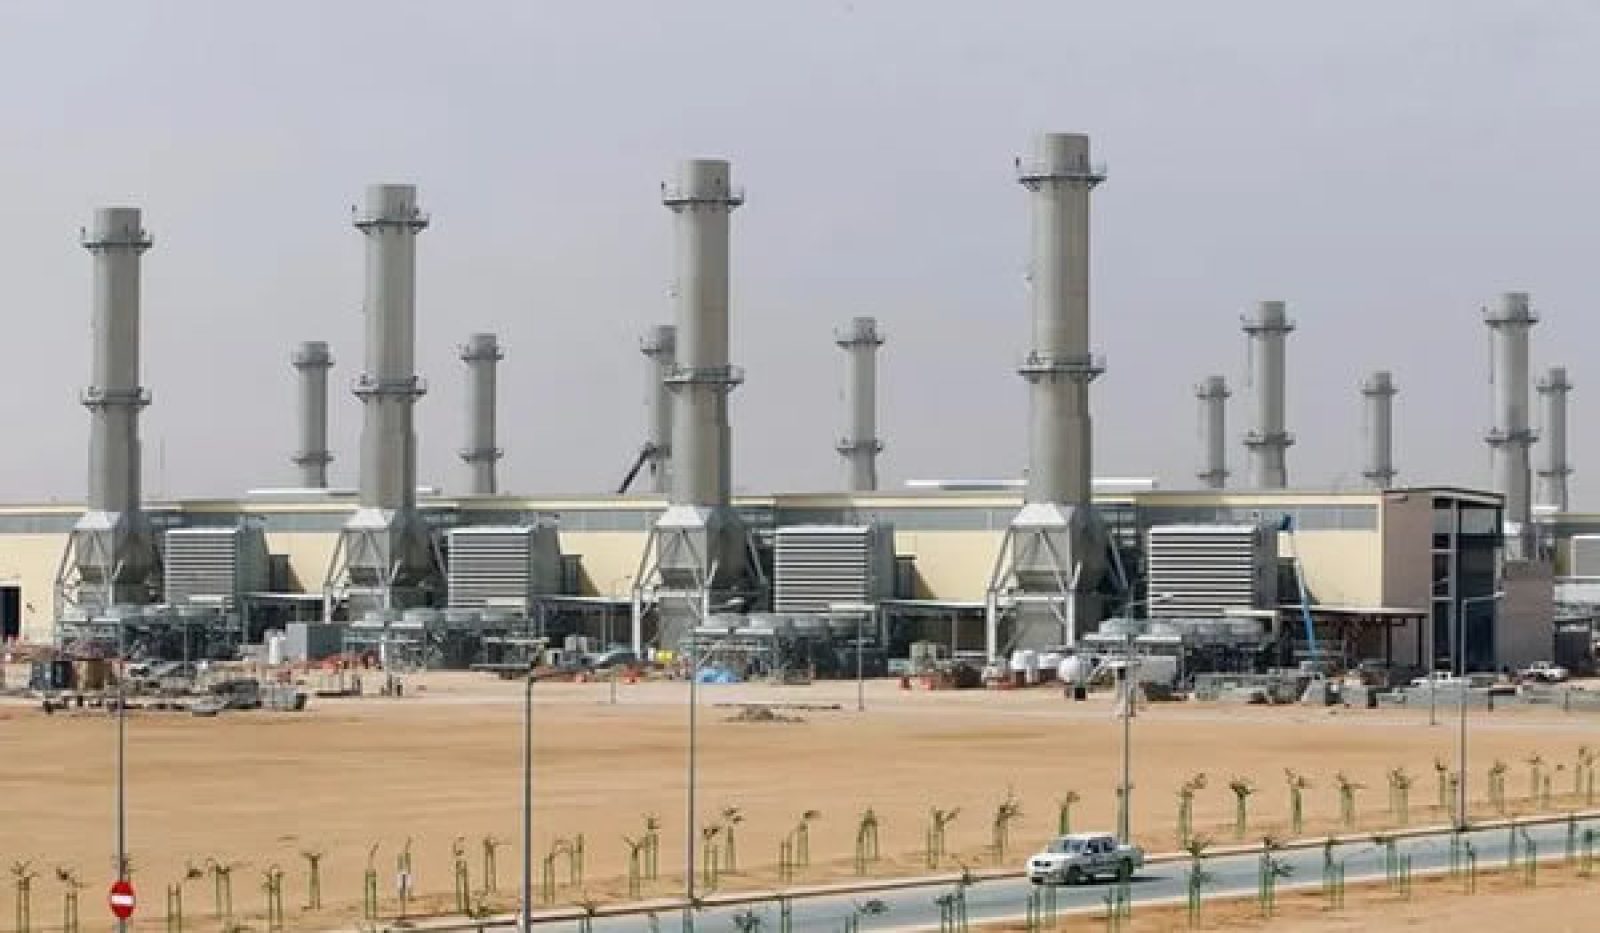 Saudi Electricity Company Appoints WSP Middle East to Support Environmental Compliance Project